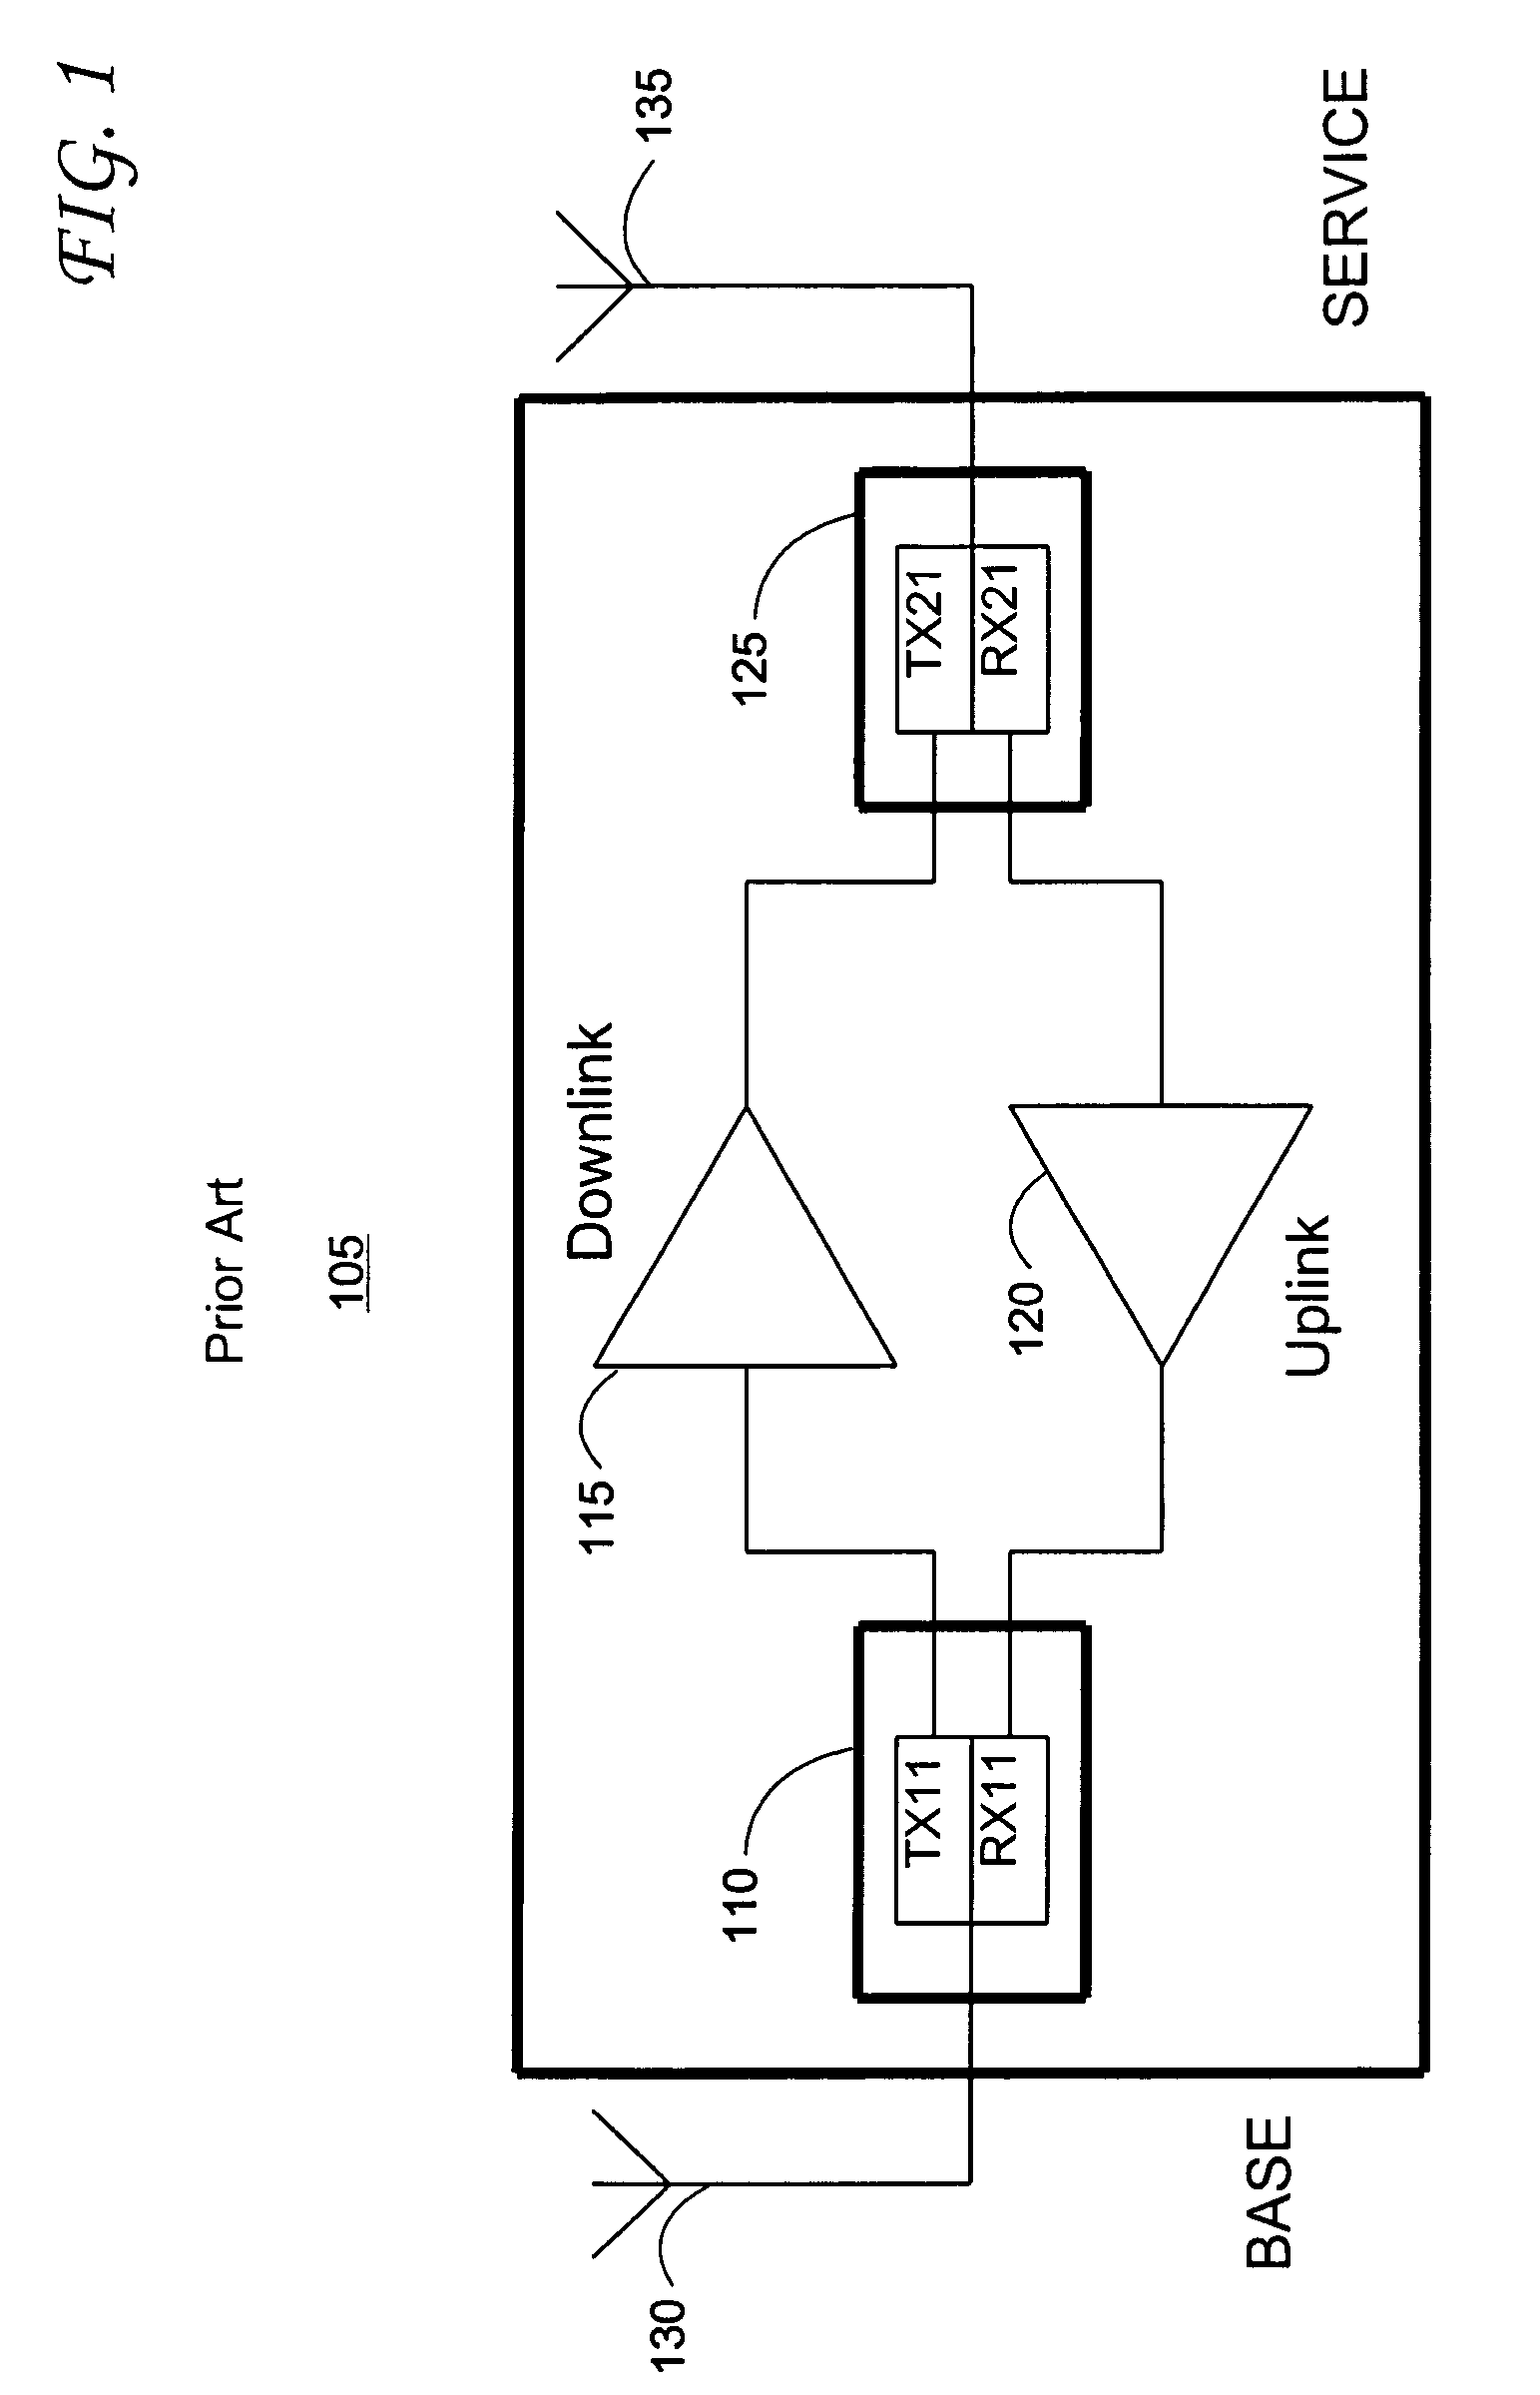 Systems and methods of efficient band amplification